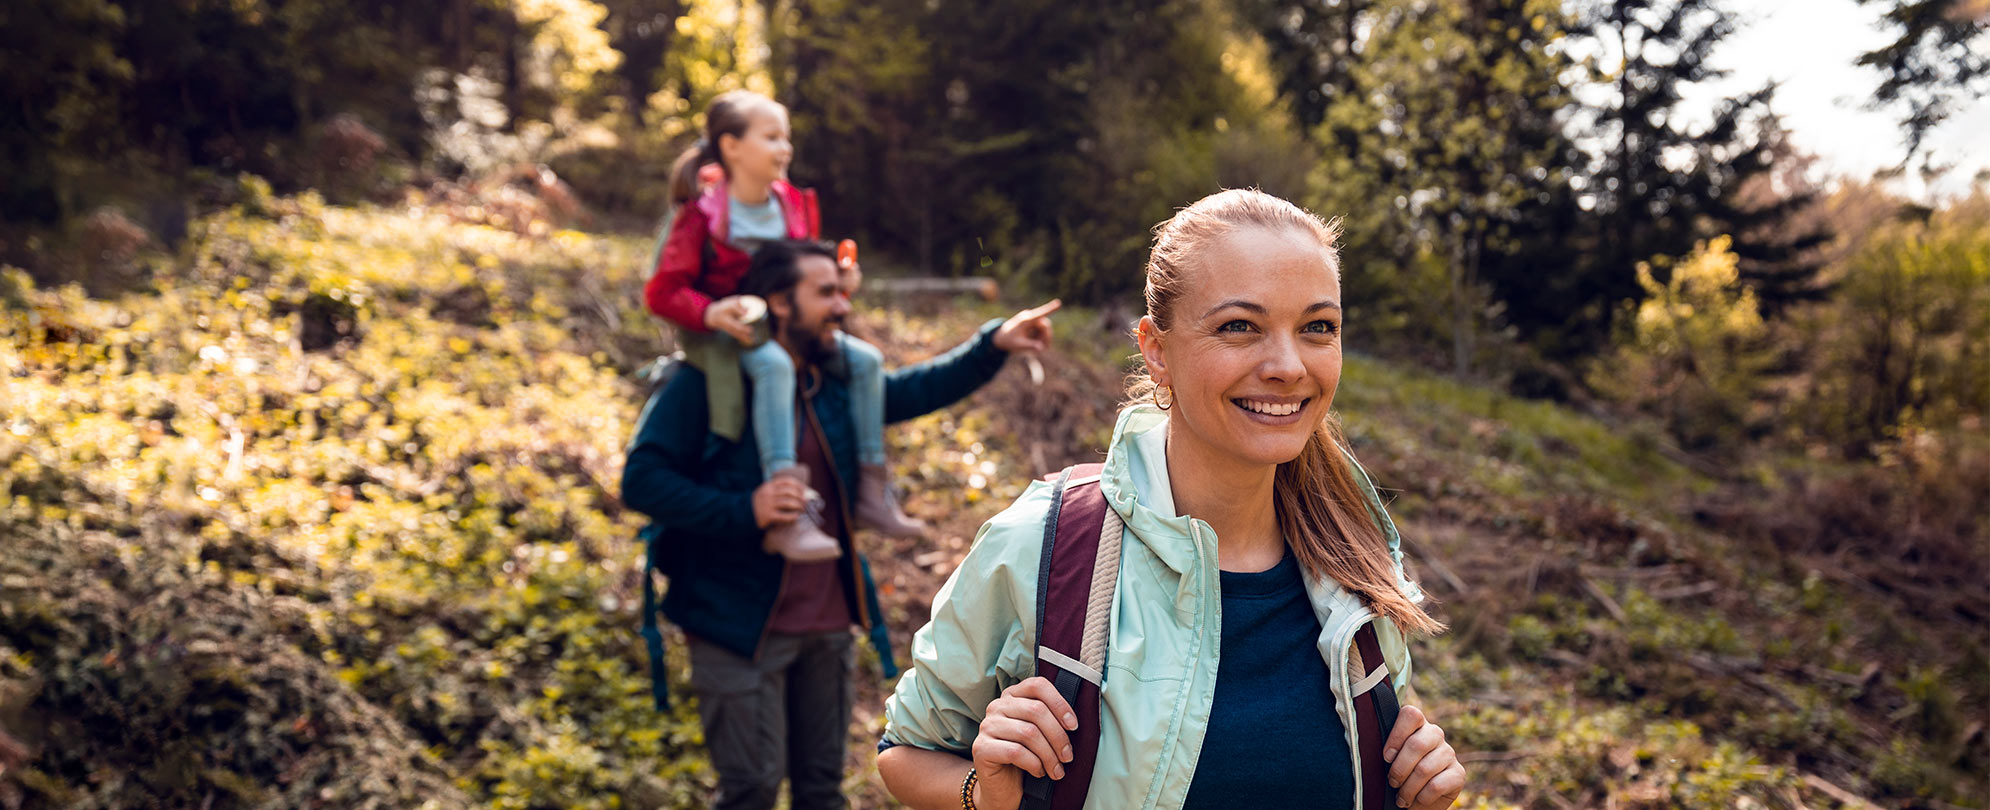 Woman smiles while hiking down a hill with a man walking behind her carrying a young girl on his shoulders and pointing to something out in the distance.